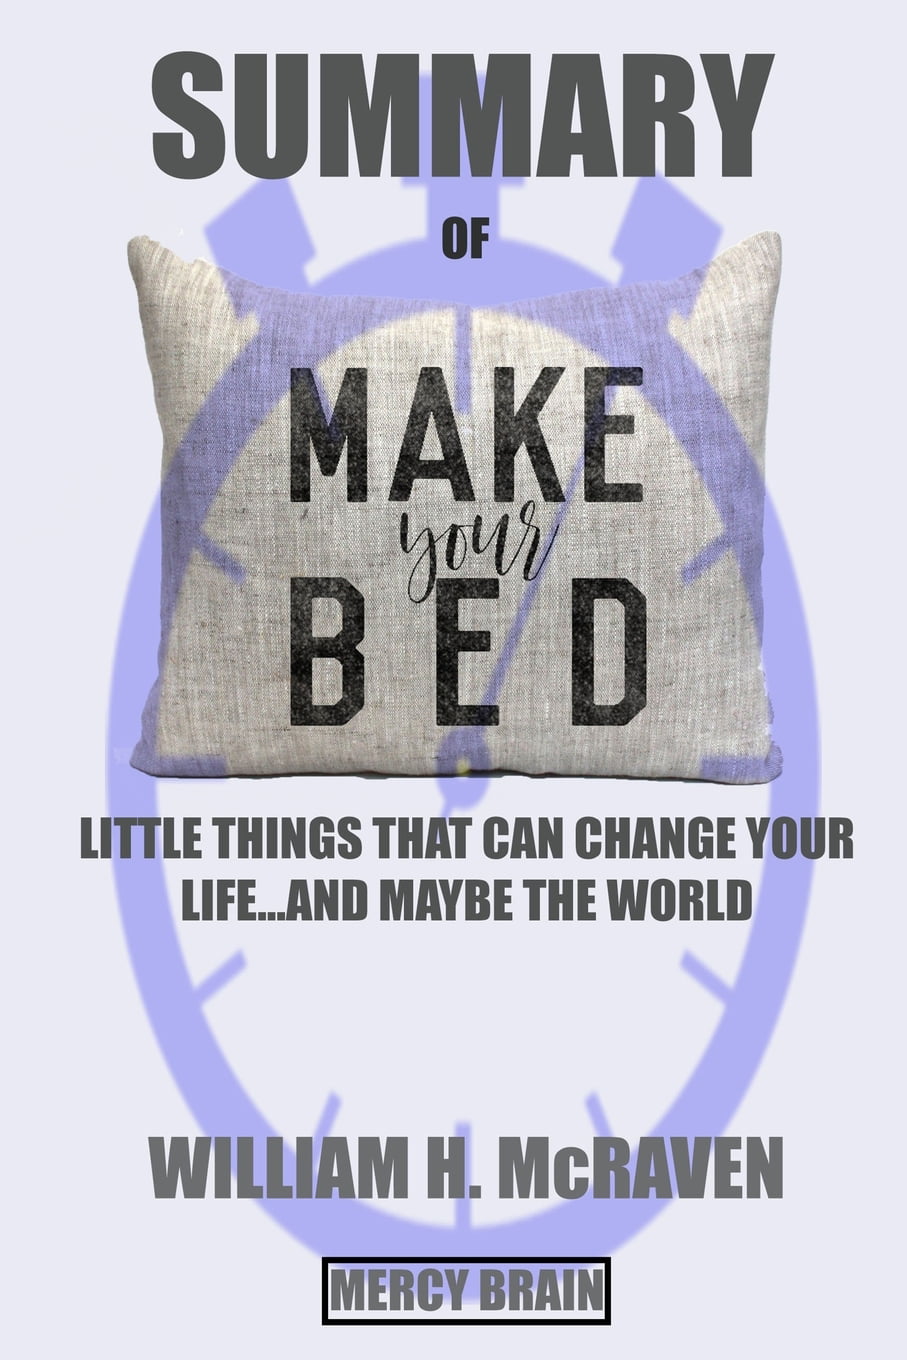 mcraven book make your bed